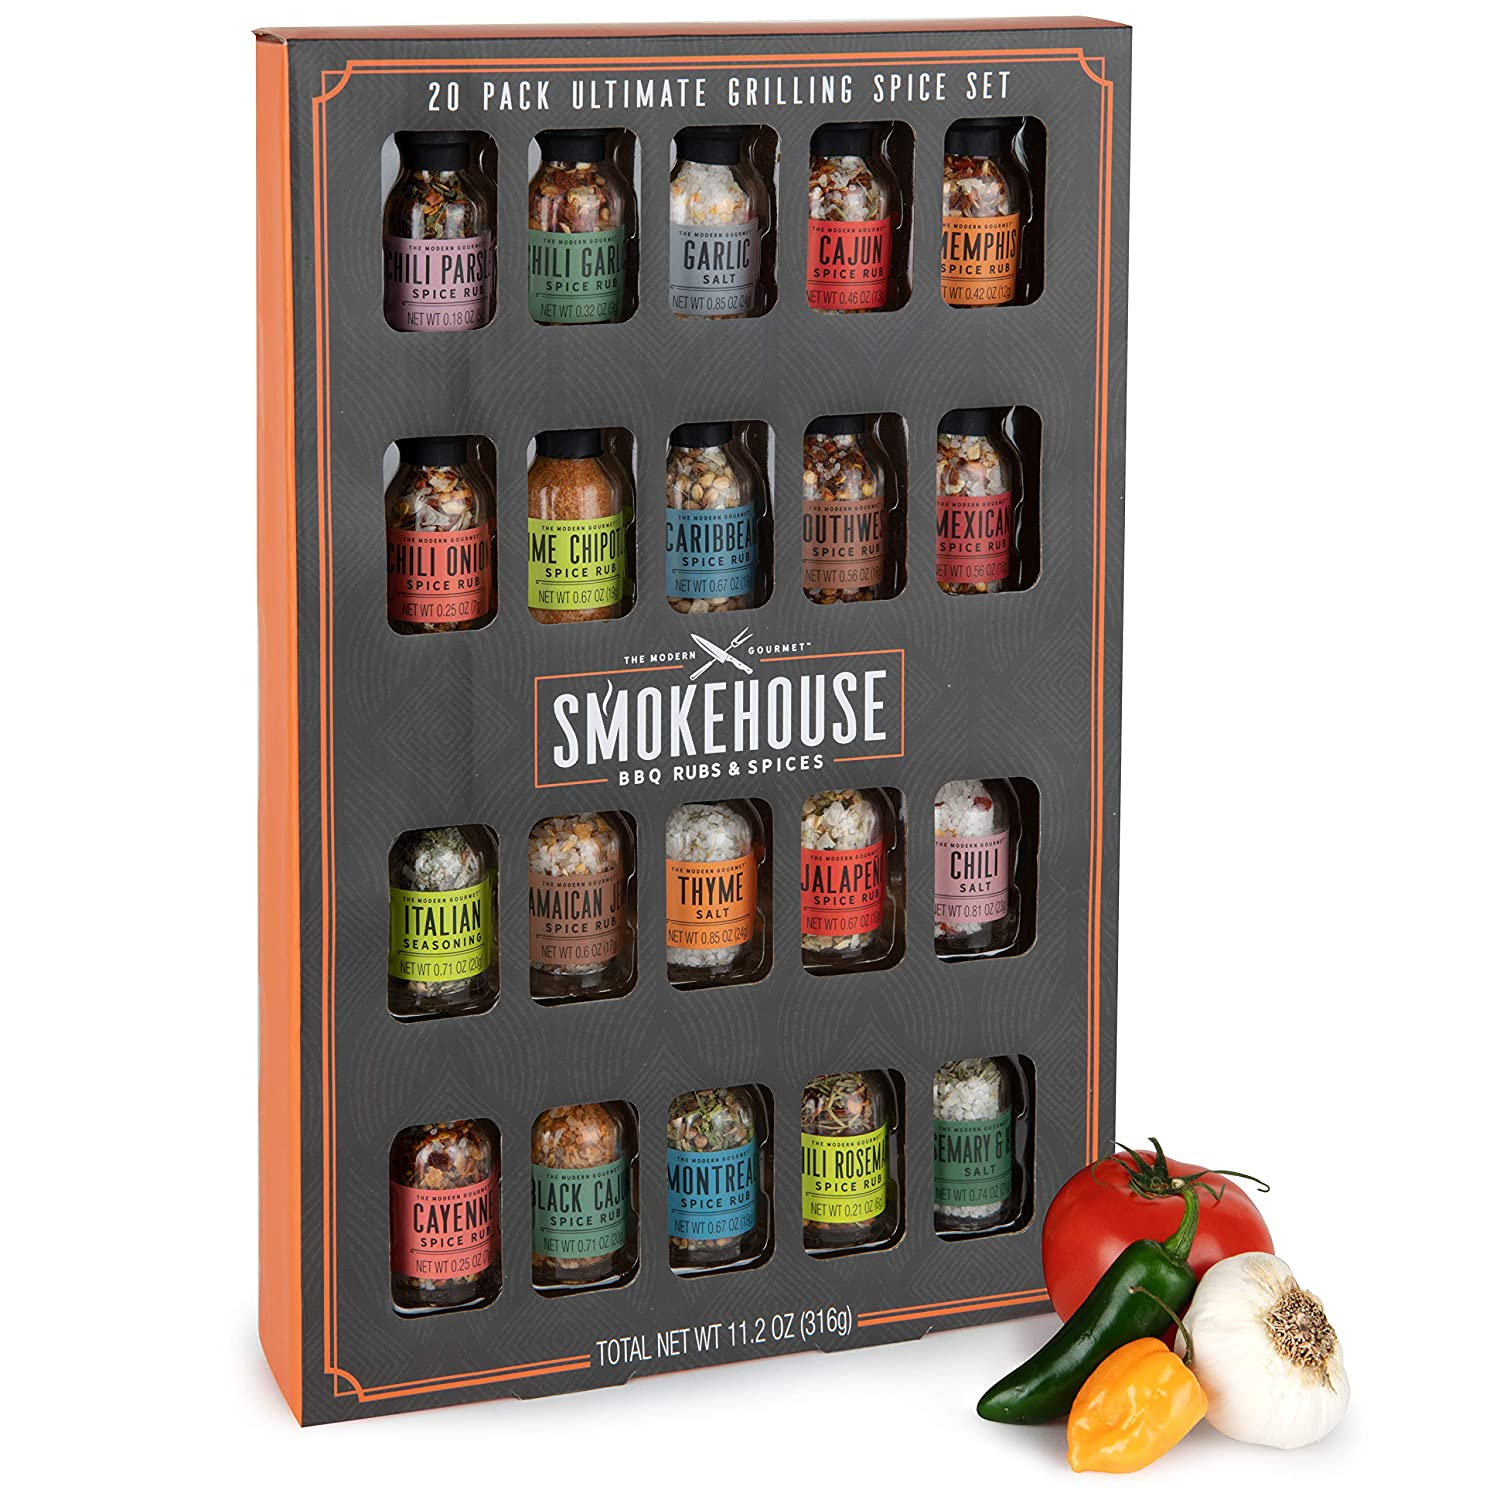 Smokehouse Ultimate Grilling Spice Set. 